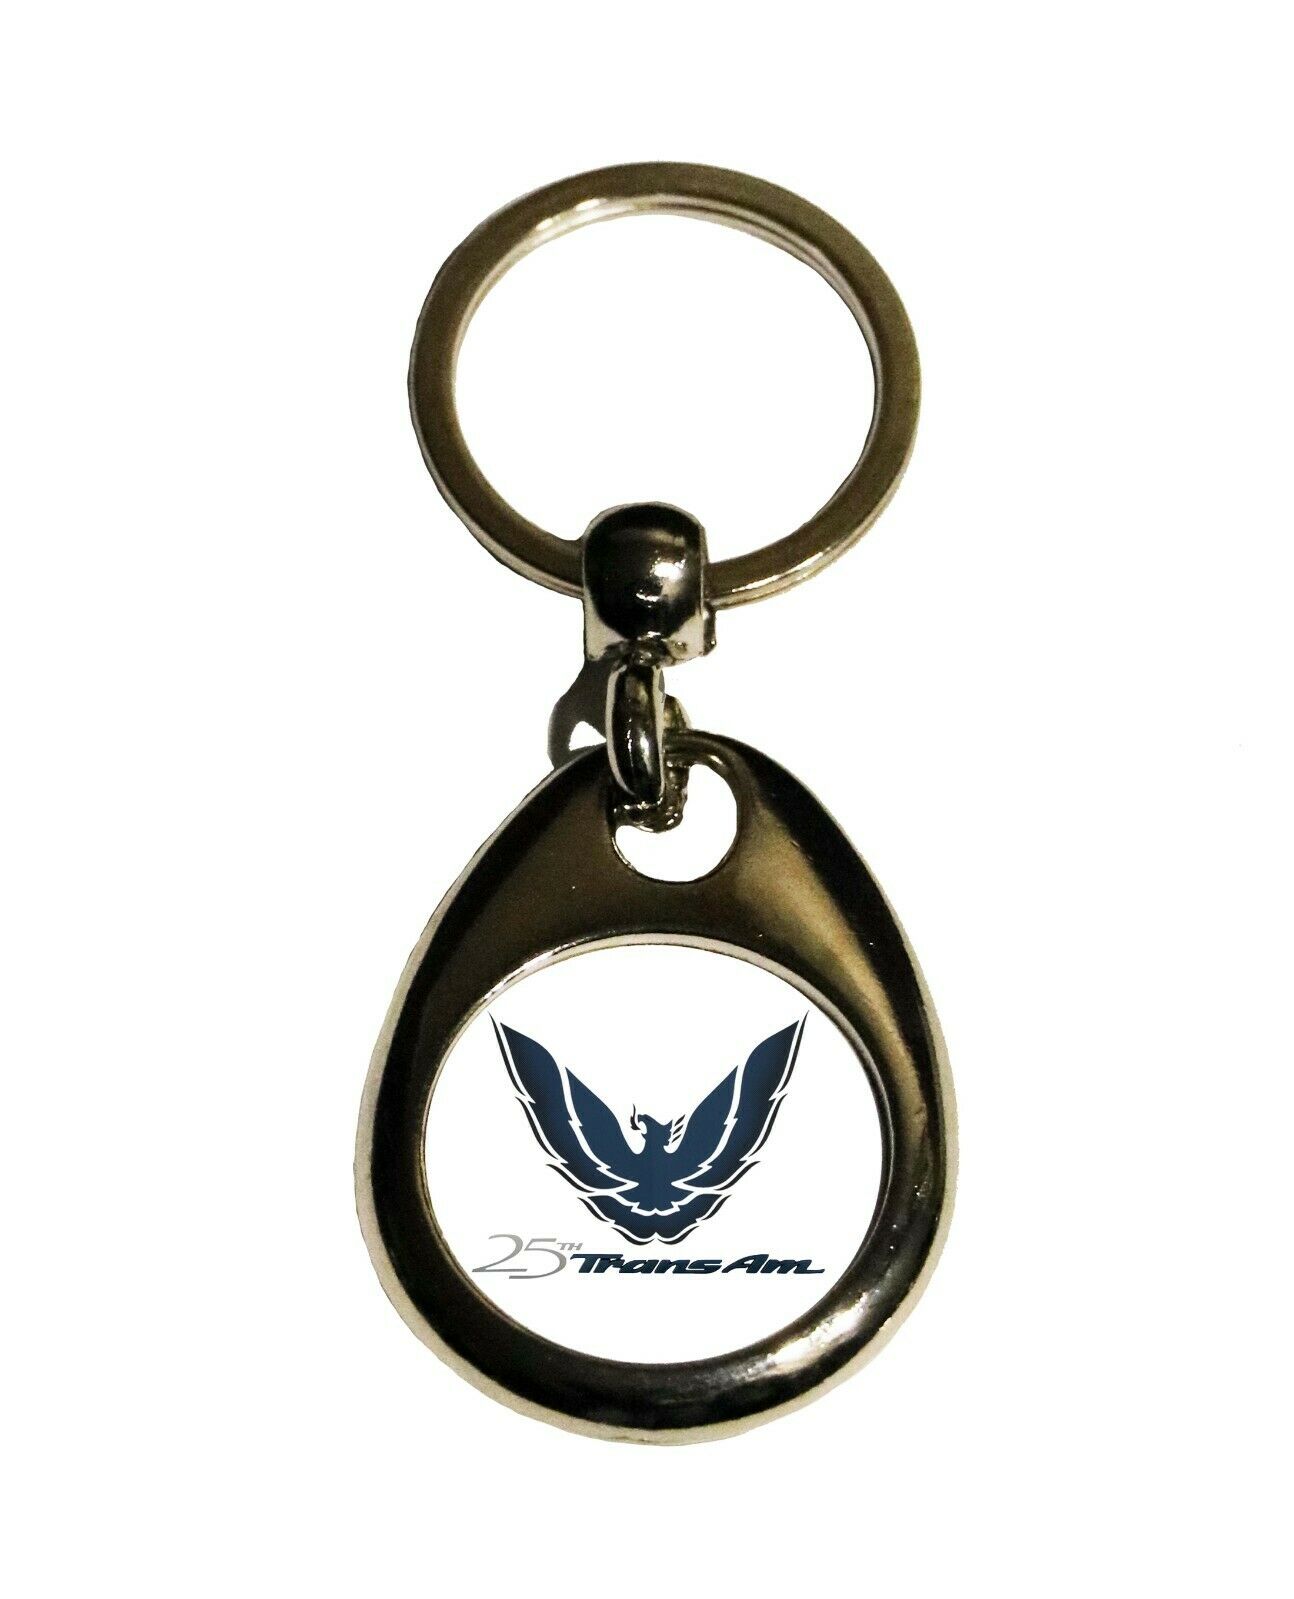 New Pontiac Anniversary Trans Am Logo Keychains (many Different, & More To Come)